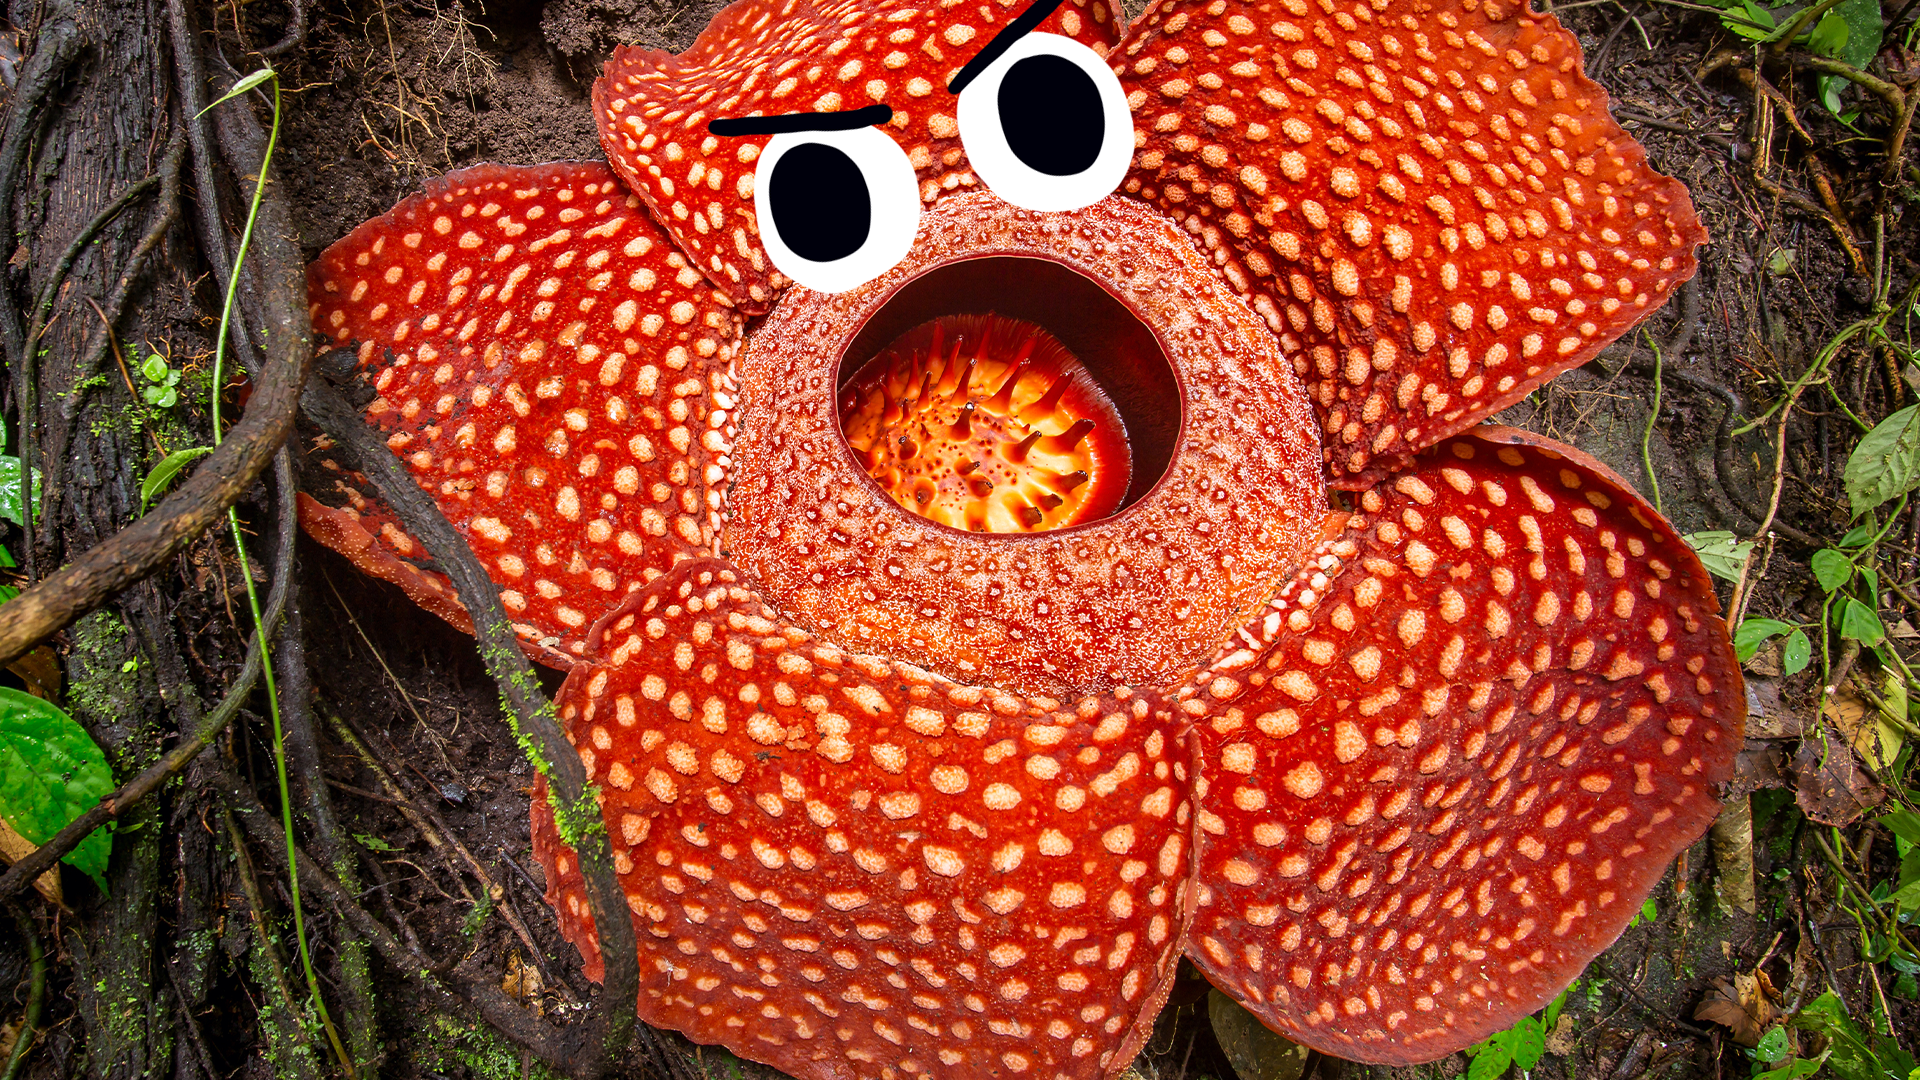 Goofy giant flower with eyes